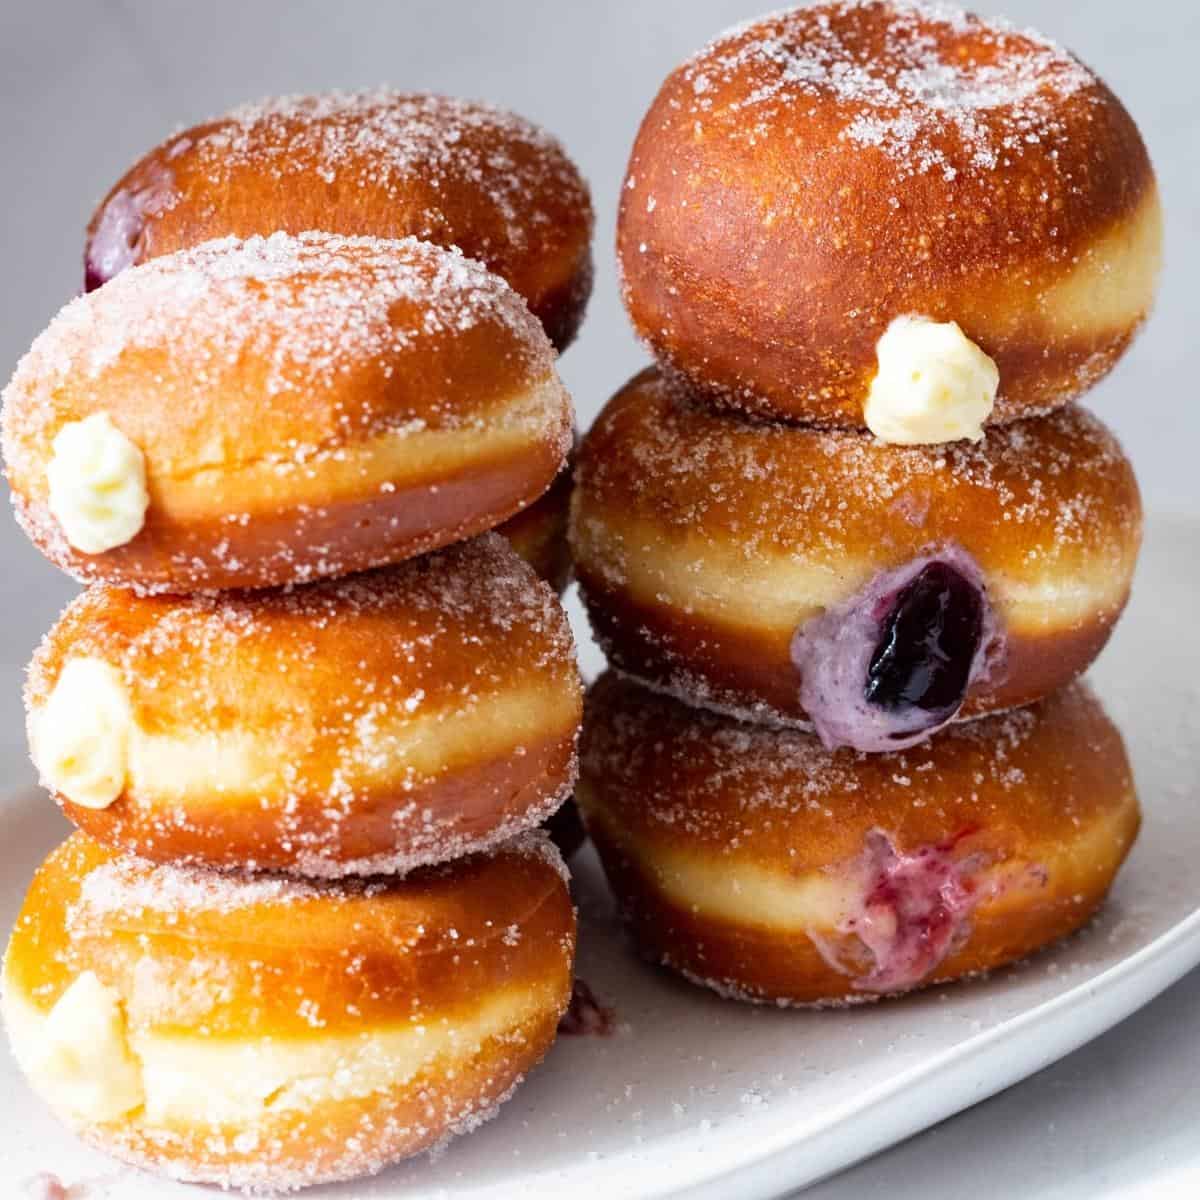 A stack of filled donuts.